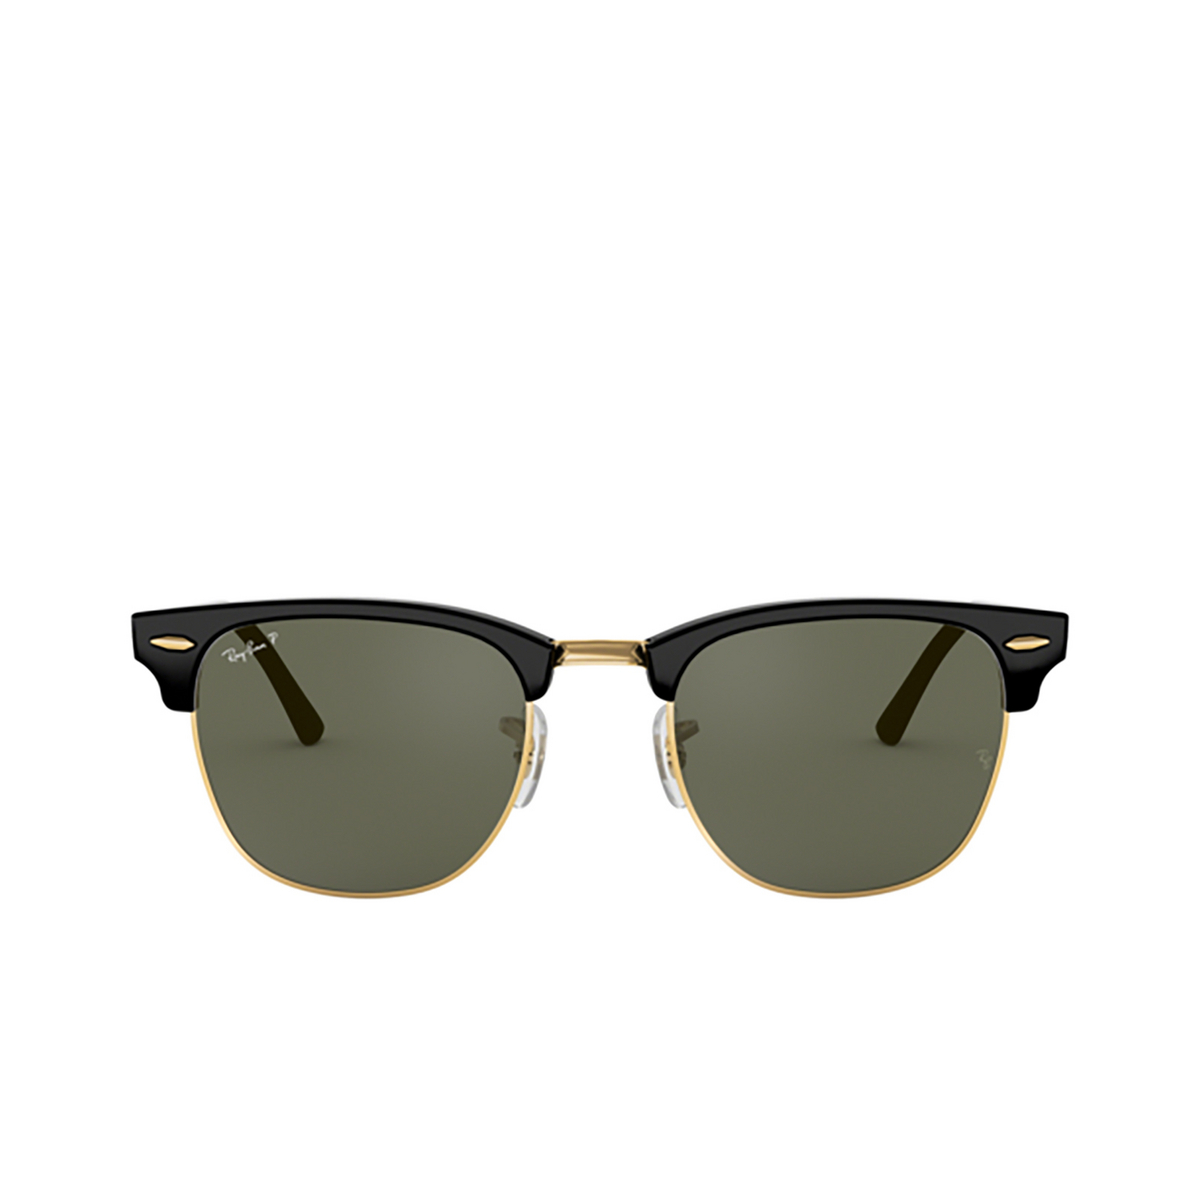 Ray-Ban CLUBMASTER Sunglasses 901/58 Black - front view